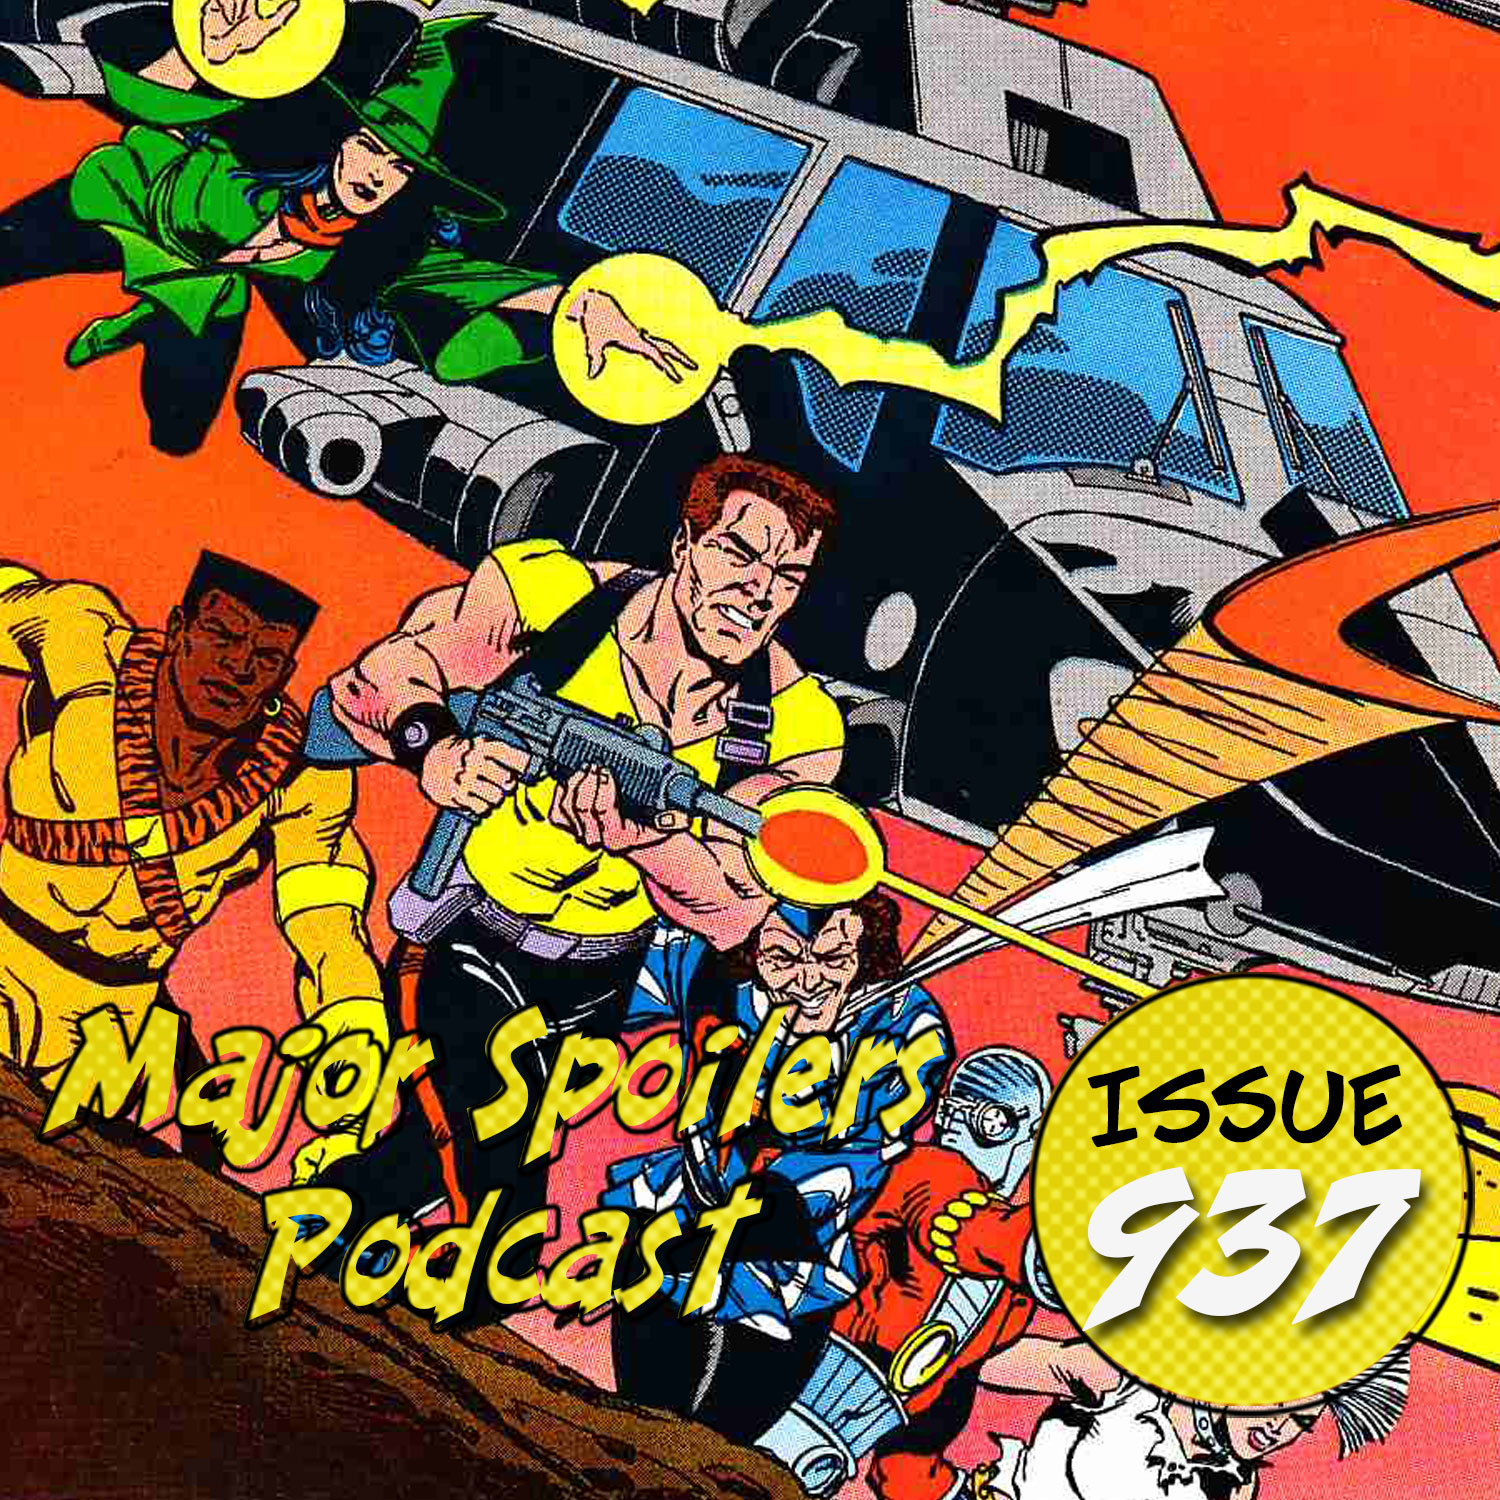 Major Spoilers Podcast #937: The One With The Suicide Squad